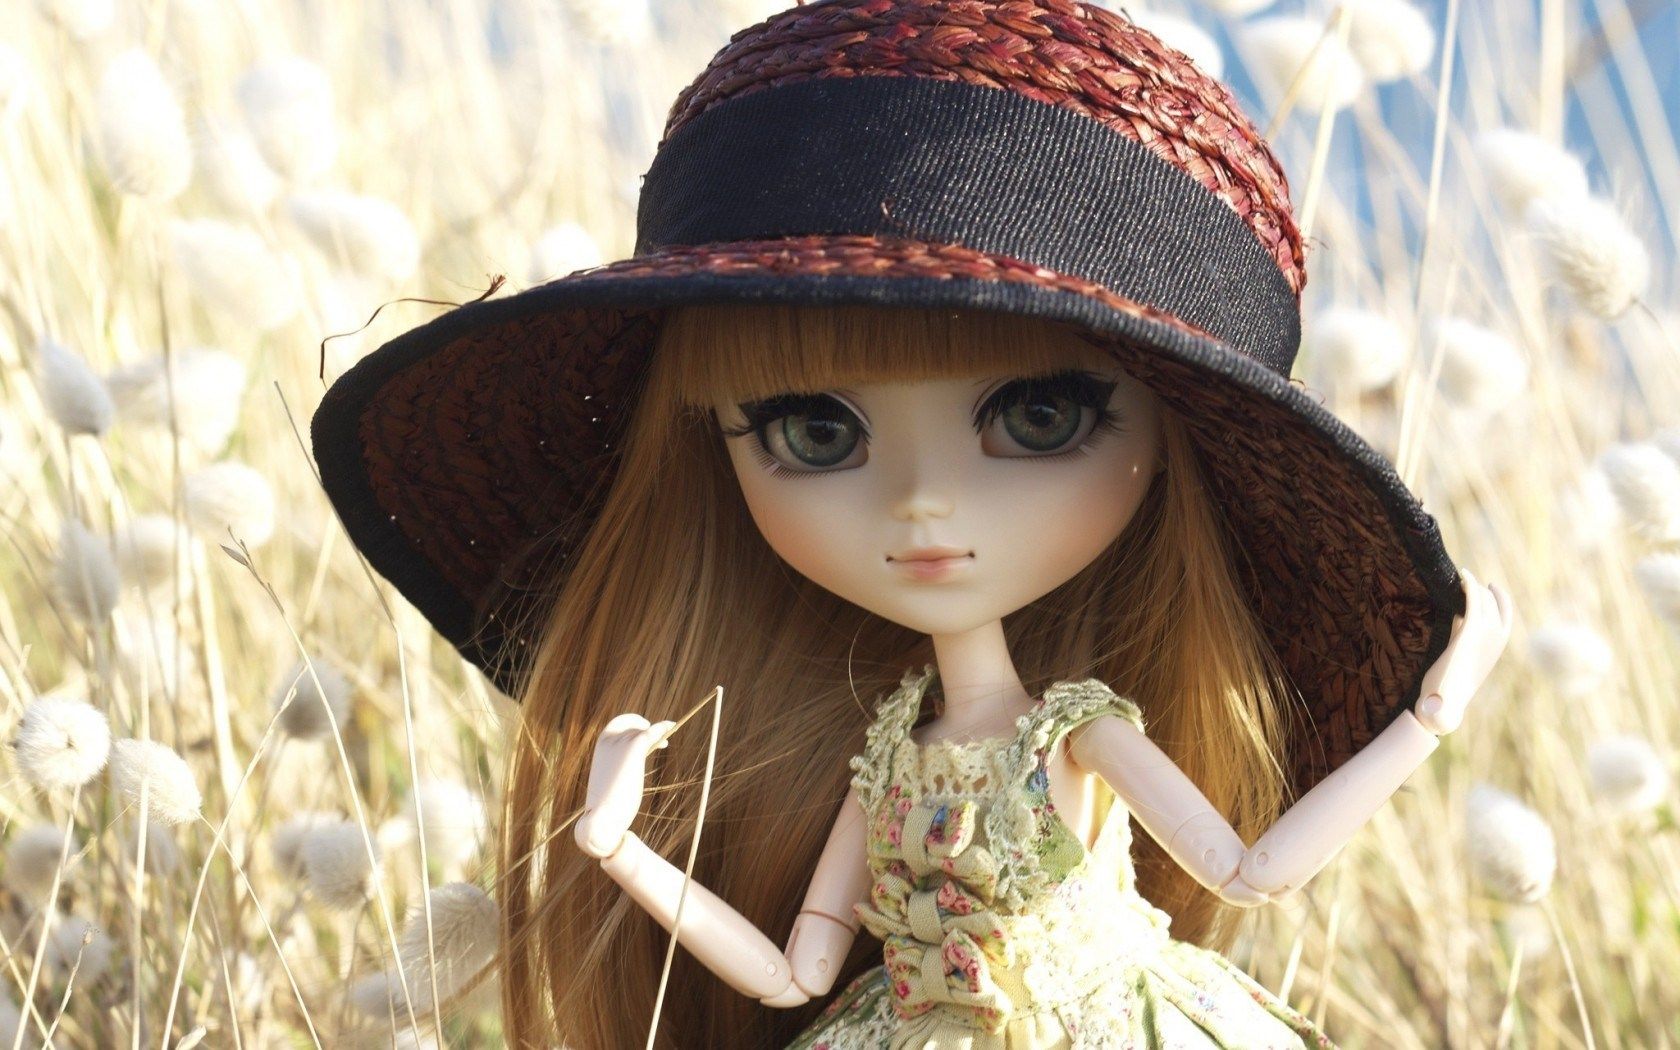 doll pictures wallpapers,doll,clothing,skin,toy,hat